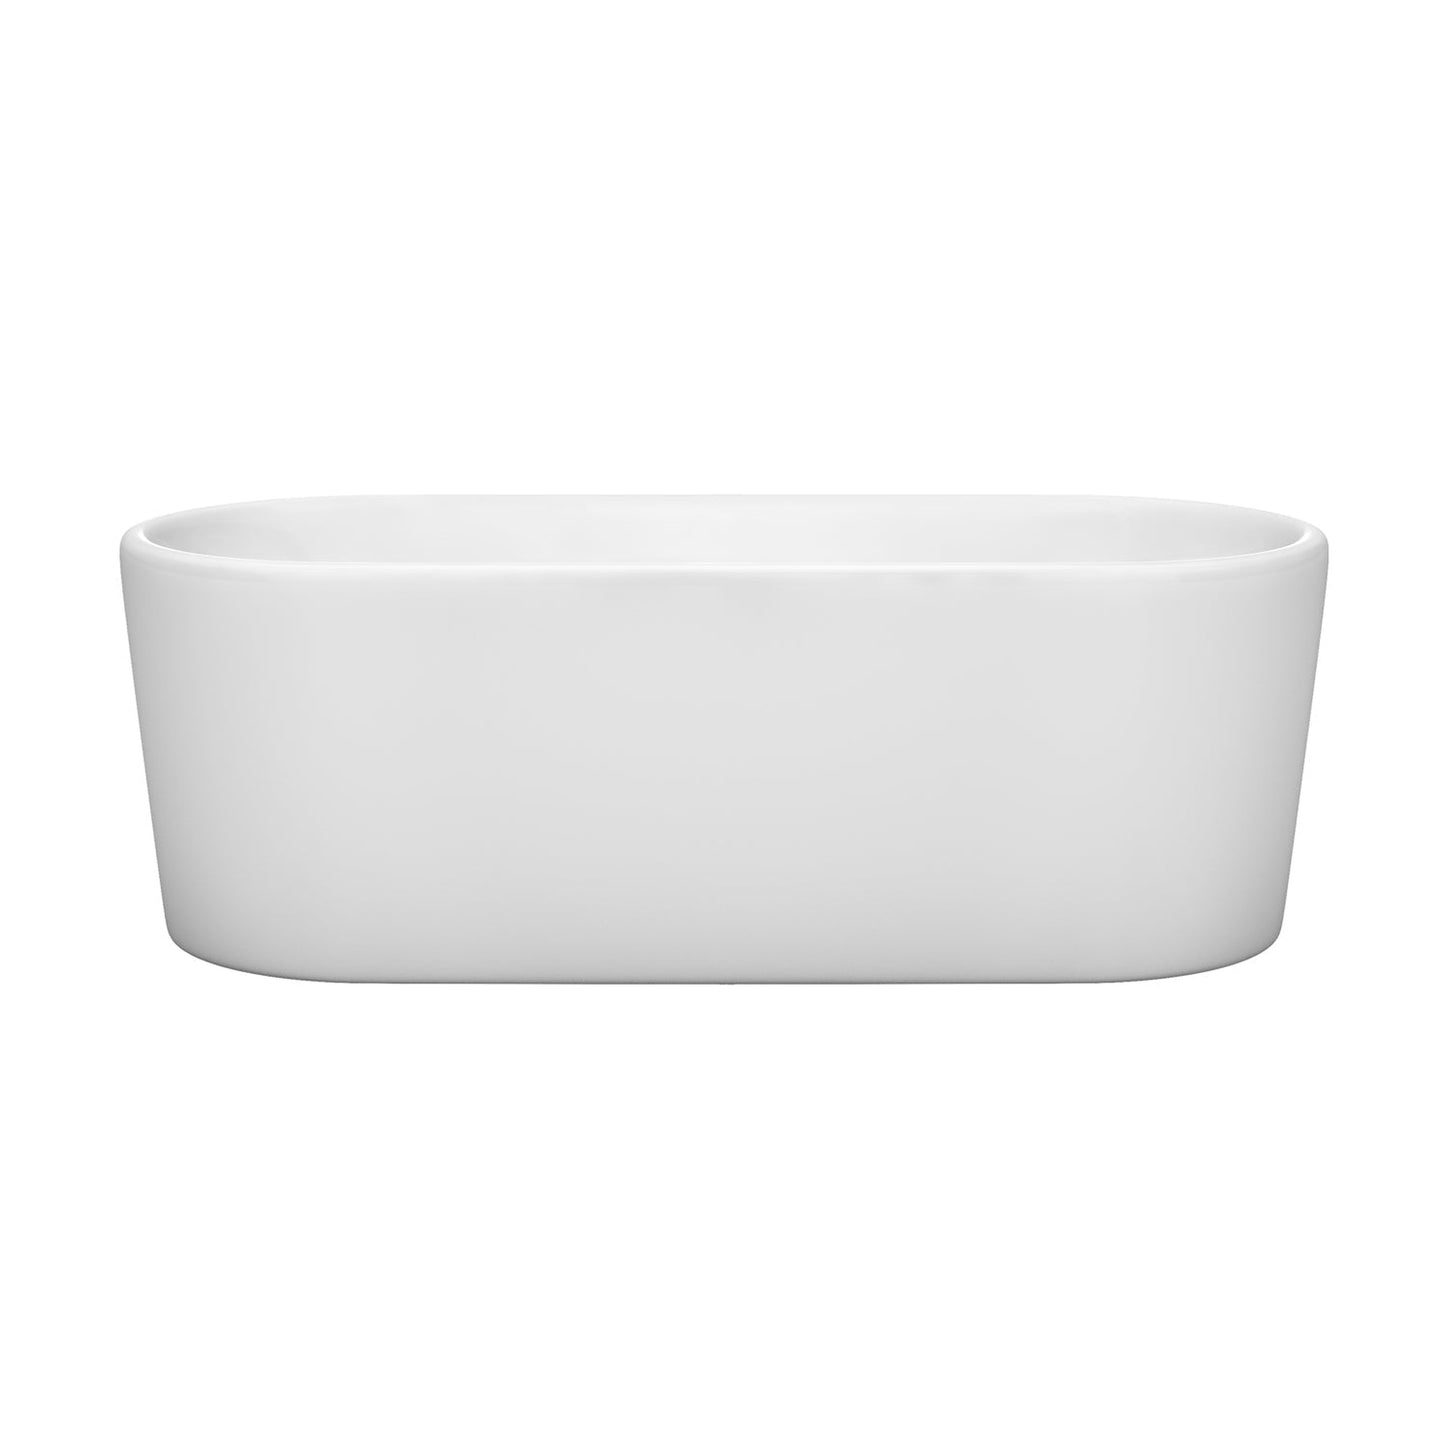 Wyndham Collection Ursula 67" Freestanding Bathtub in White With Polished Chrome Drain and Overflow Trim